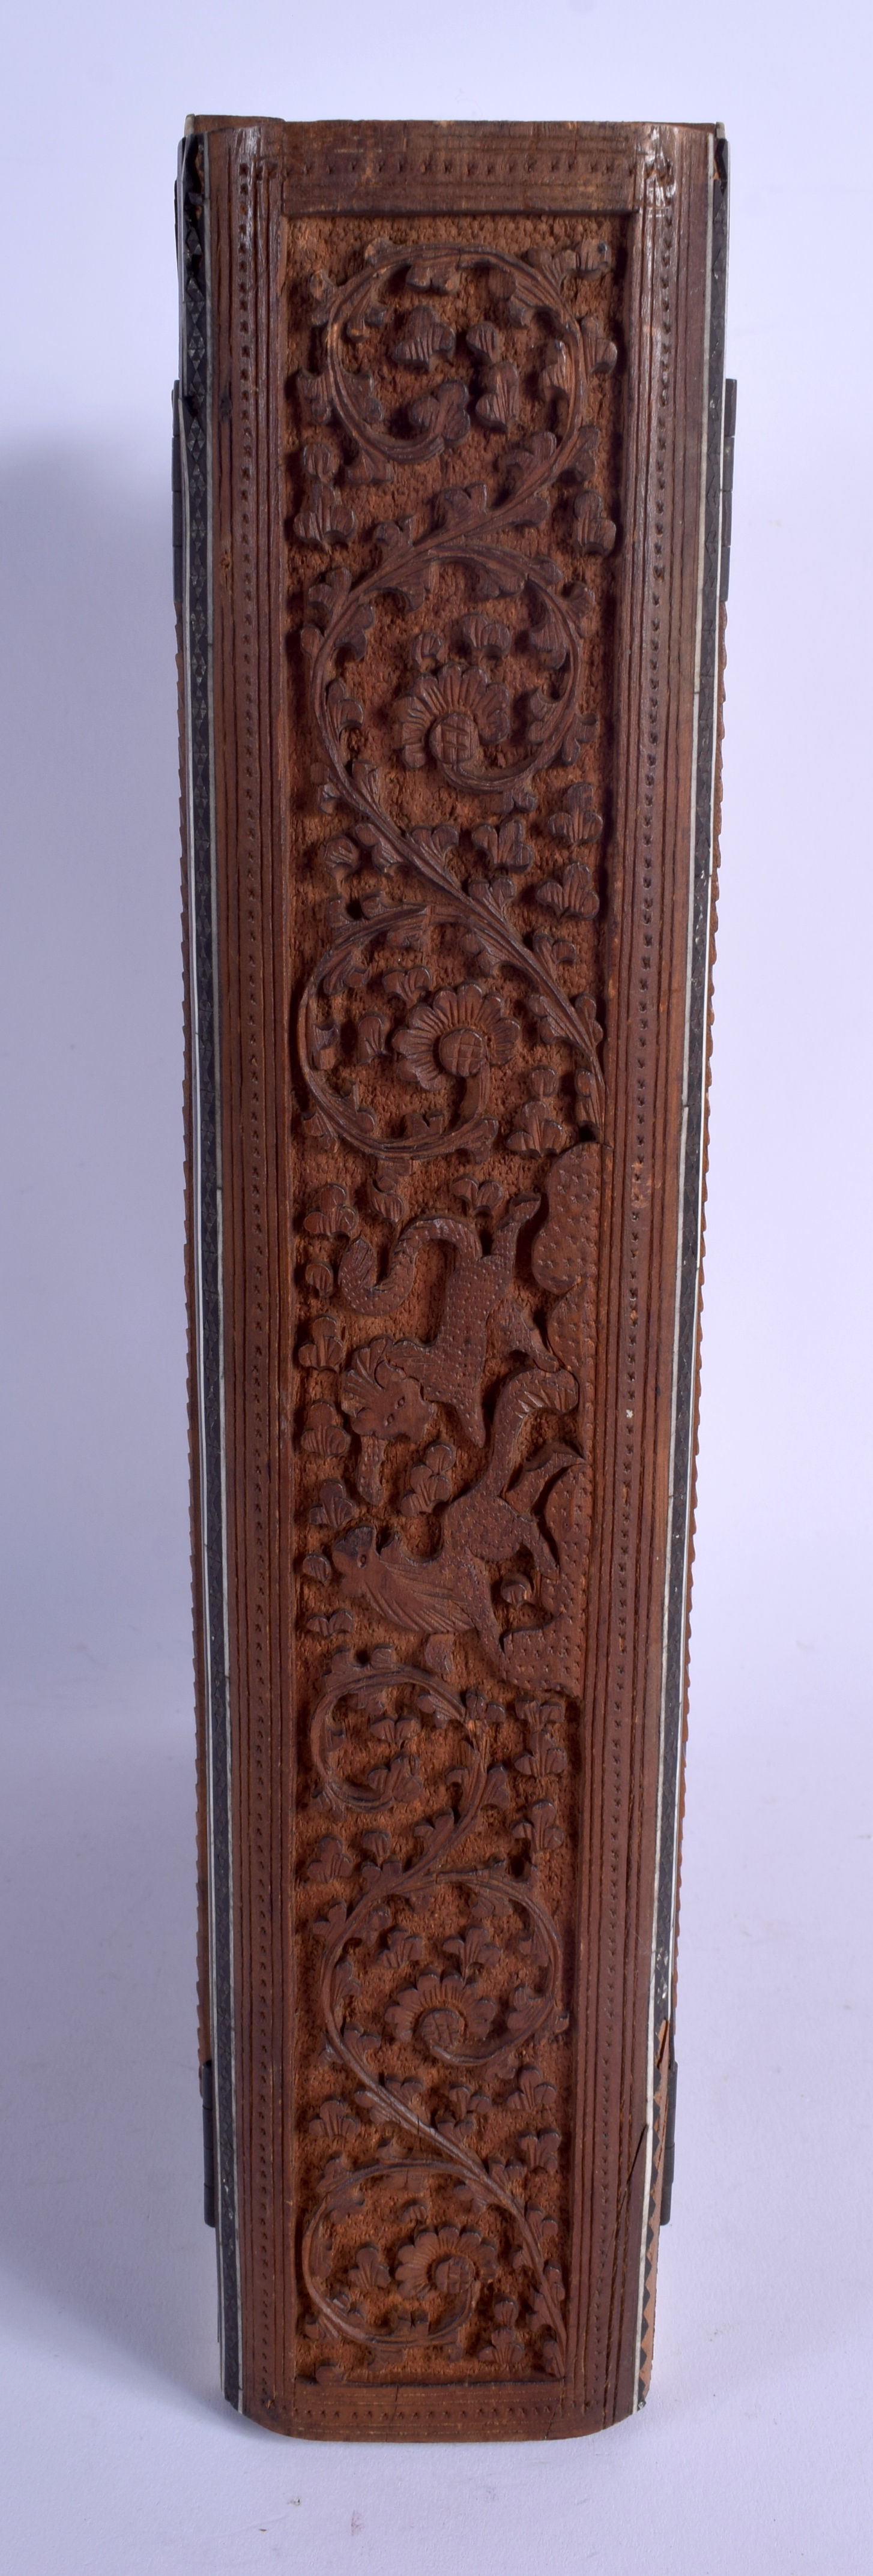 A RARE LARGE 19TH CENTURY MIDDLE EASTERN IVORY AND SANDALWOOD BOOK COVER decorated with elephants a - Image 4 of 5